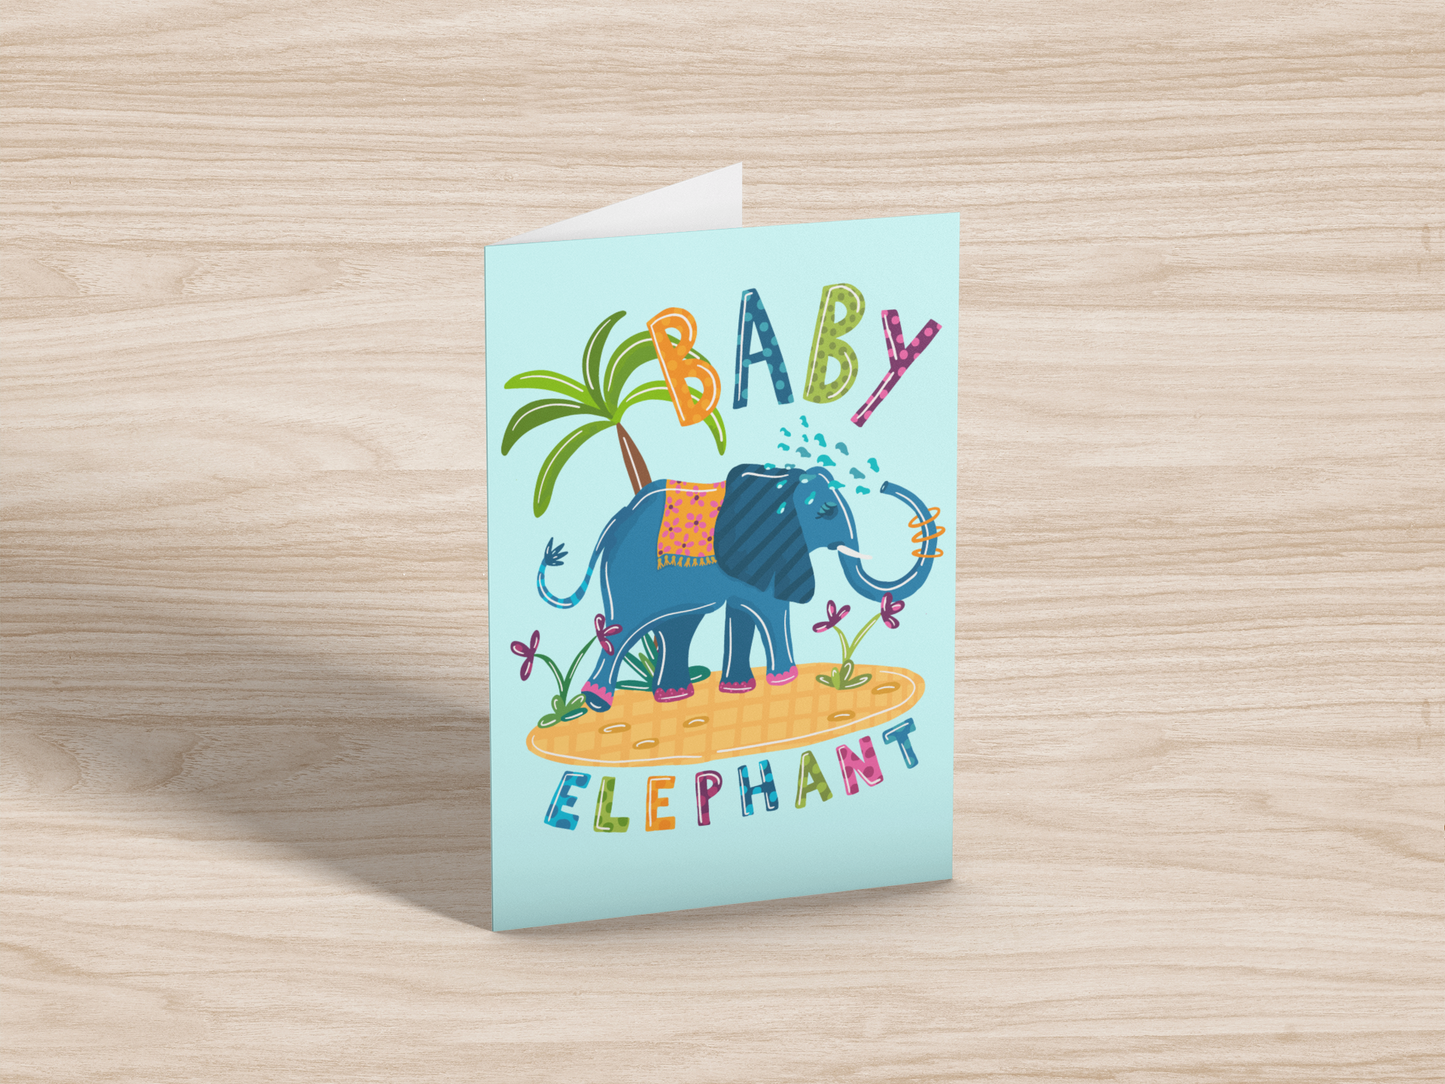 Baby Elephant Surface Design For Greeting Cards and Stationery